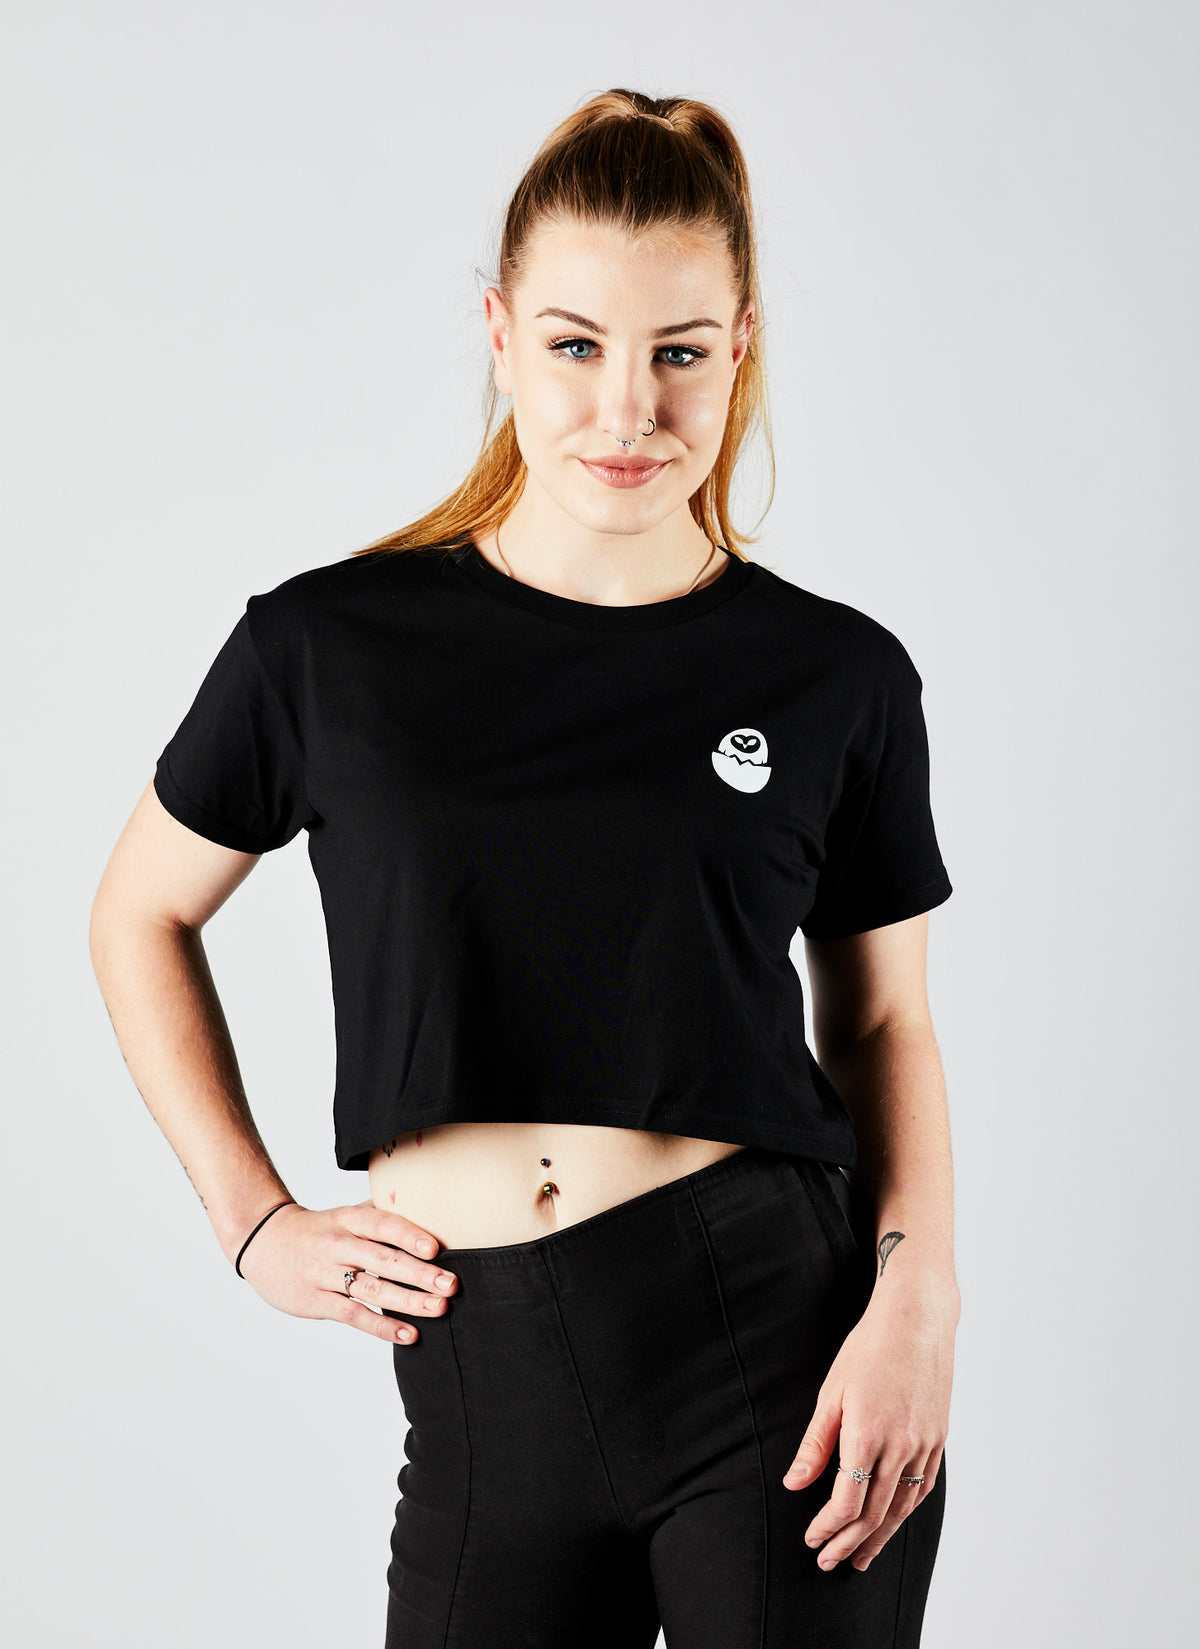 Front angle of a young woman wearing a black, crop &quot;Special Effects Supervisor&quot; shirt from Melbourne video production company, Enamoured Iris